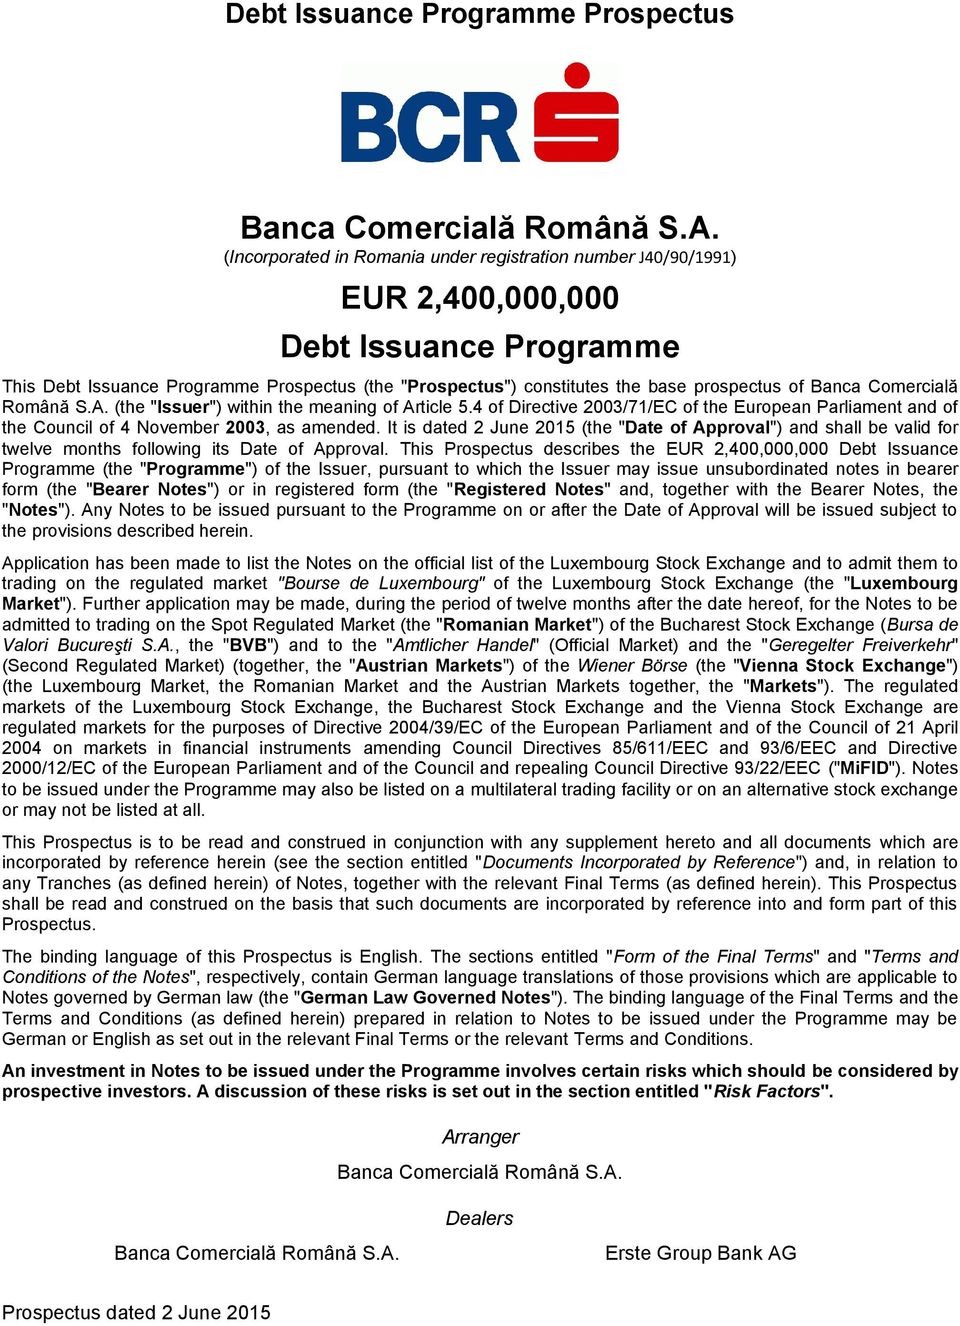 Banca Comercială Română S.A. (the "Issuer") within the meaning of Article 5.4 of Directive 2003/71/EC of the European Parliament and of the Council of 4 November 2003, as amended.